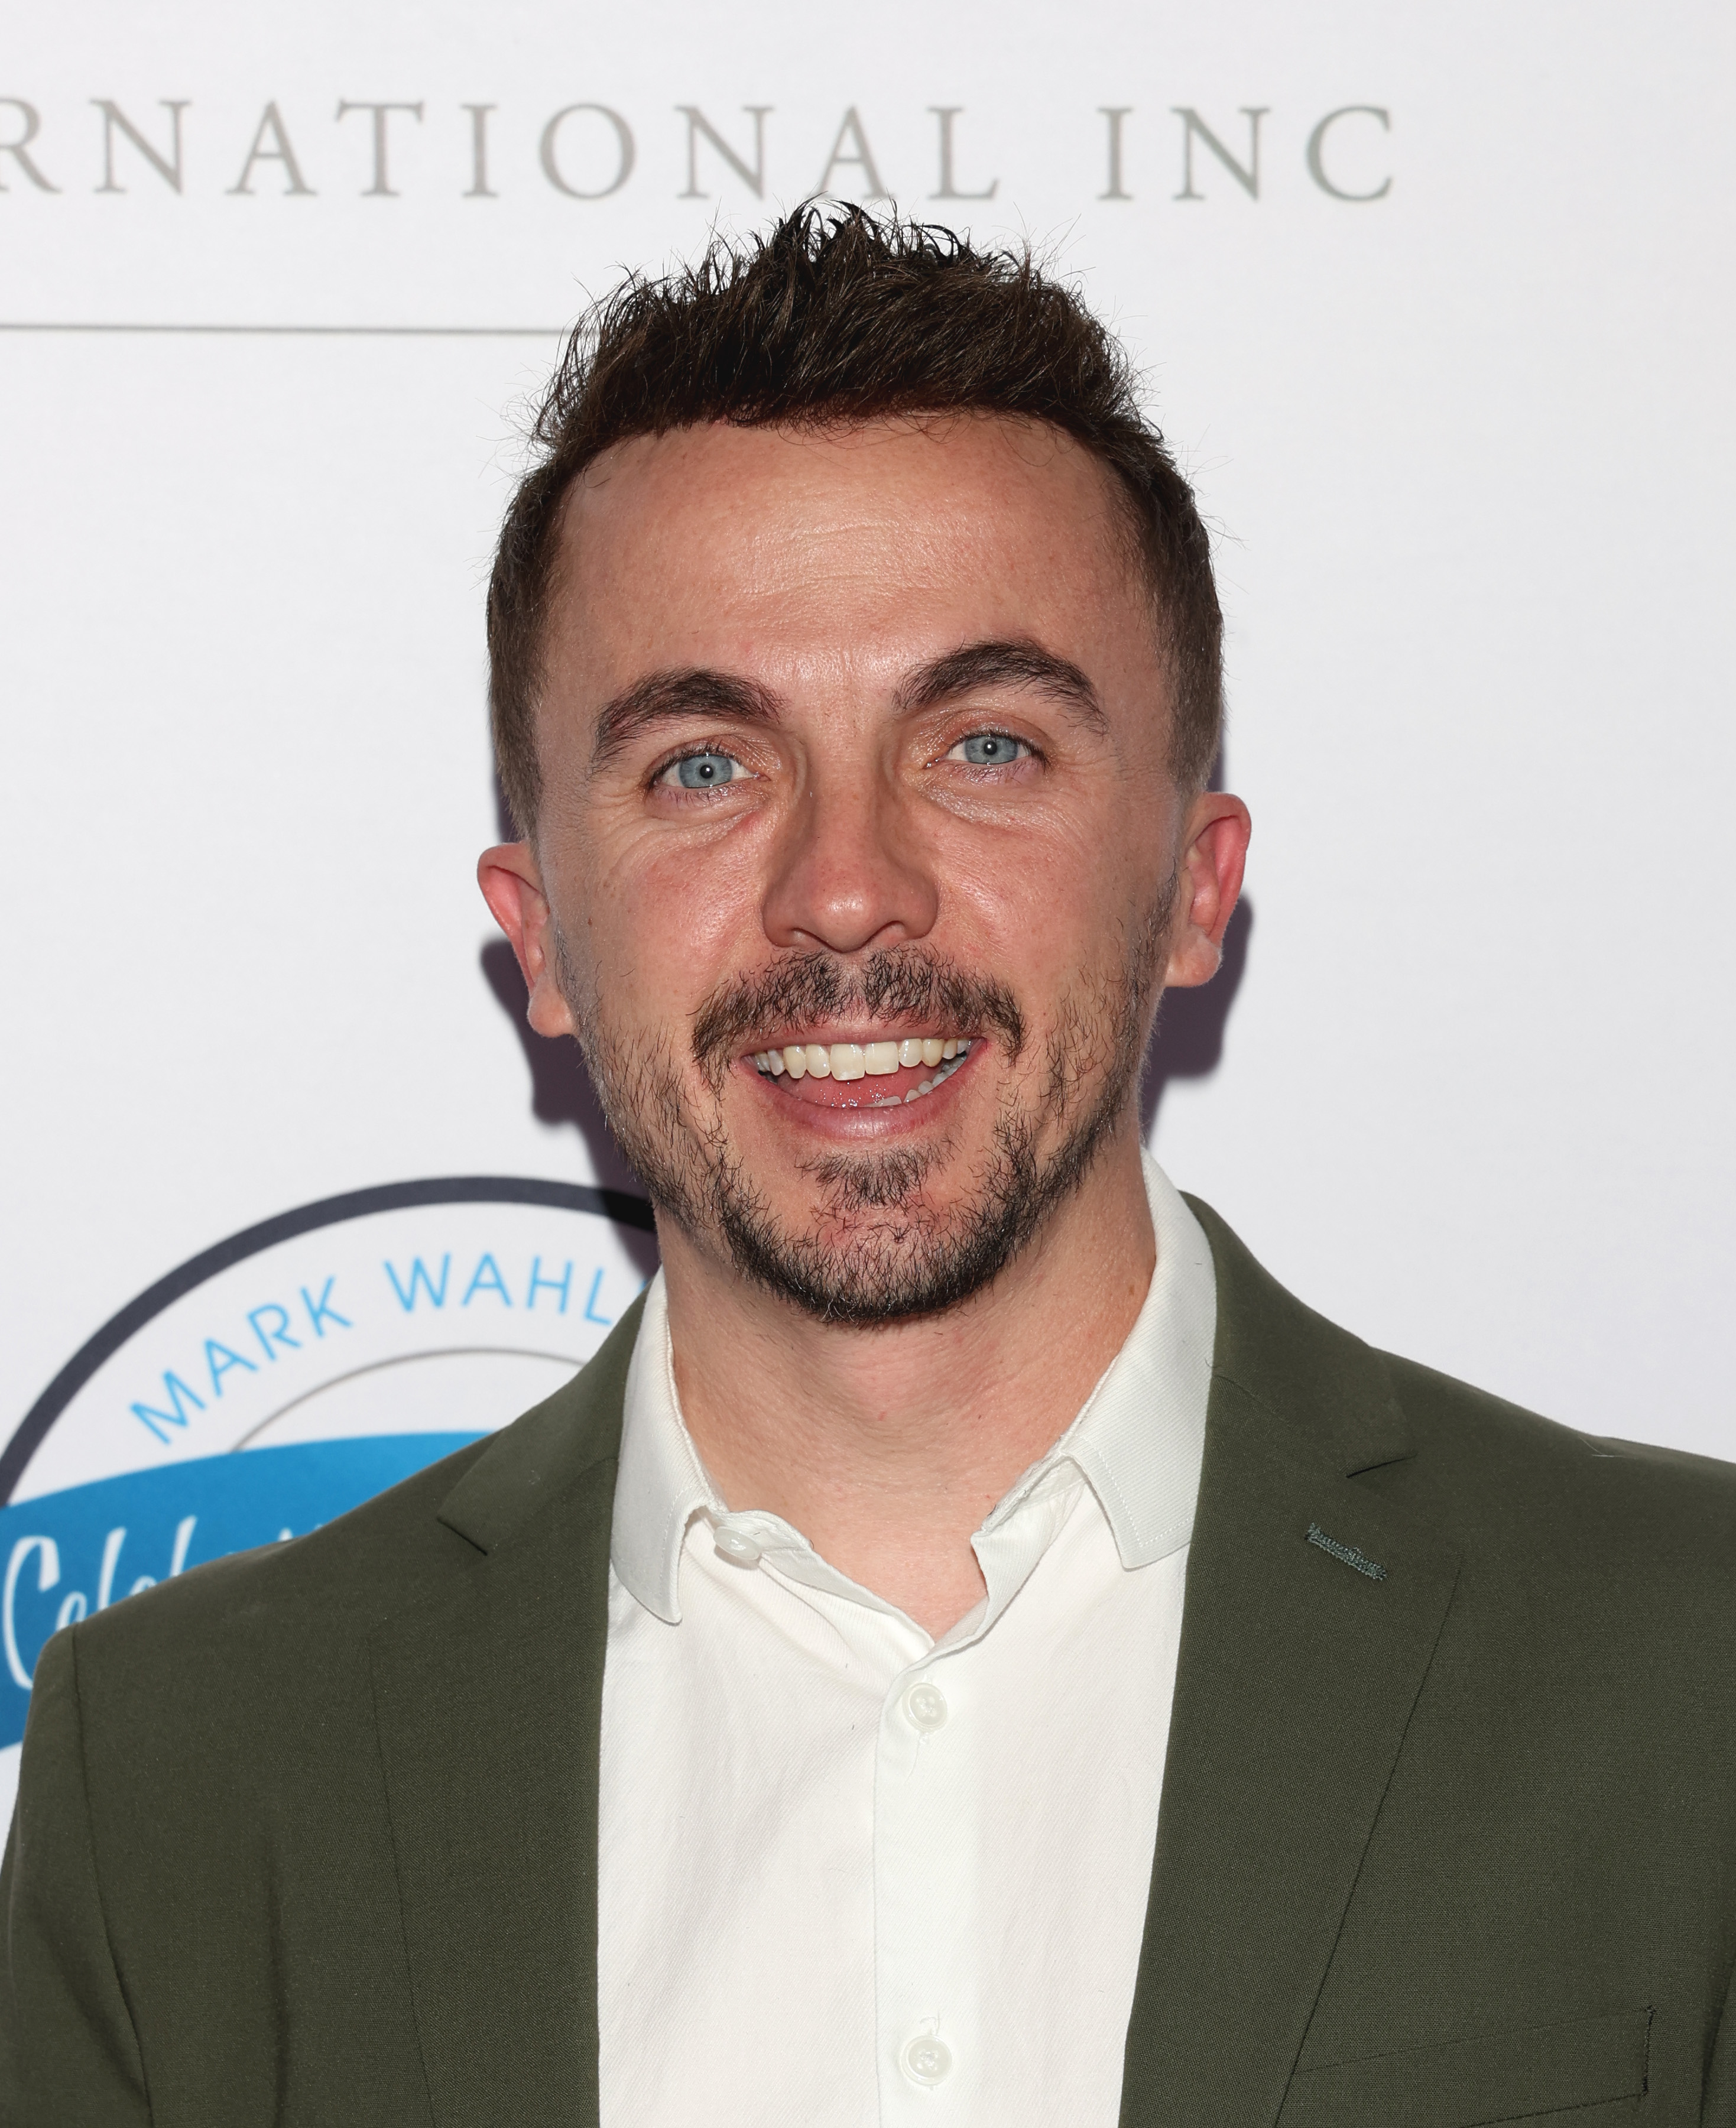 Frankie Muniz smiling in a green jacket and white shirt at a Mark Wahlberg event